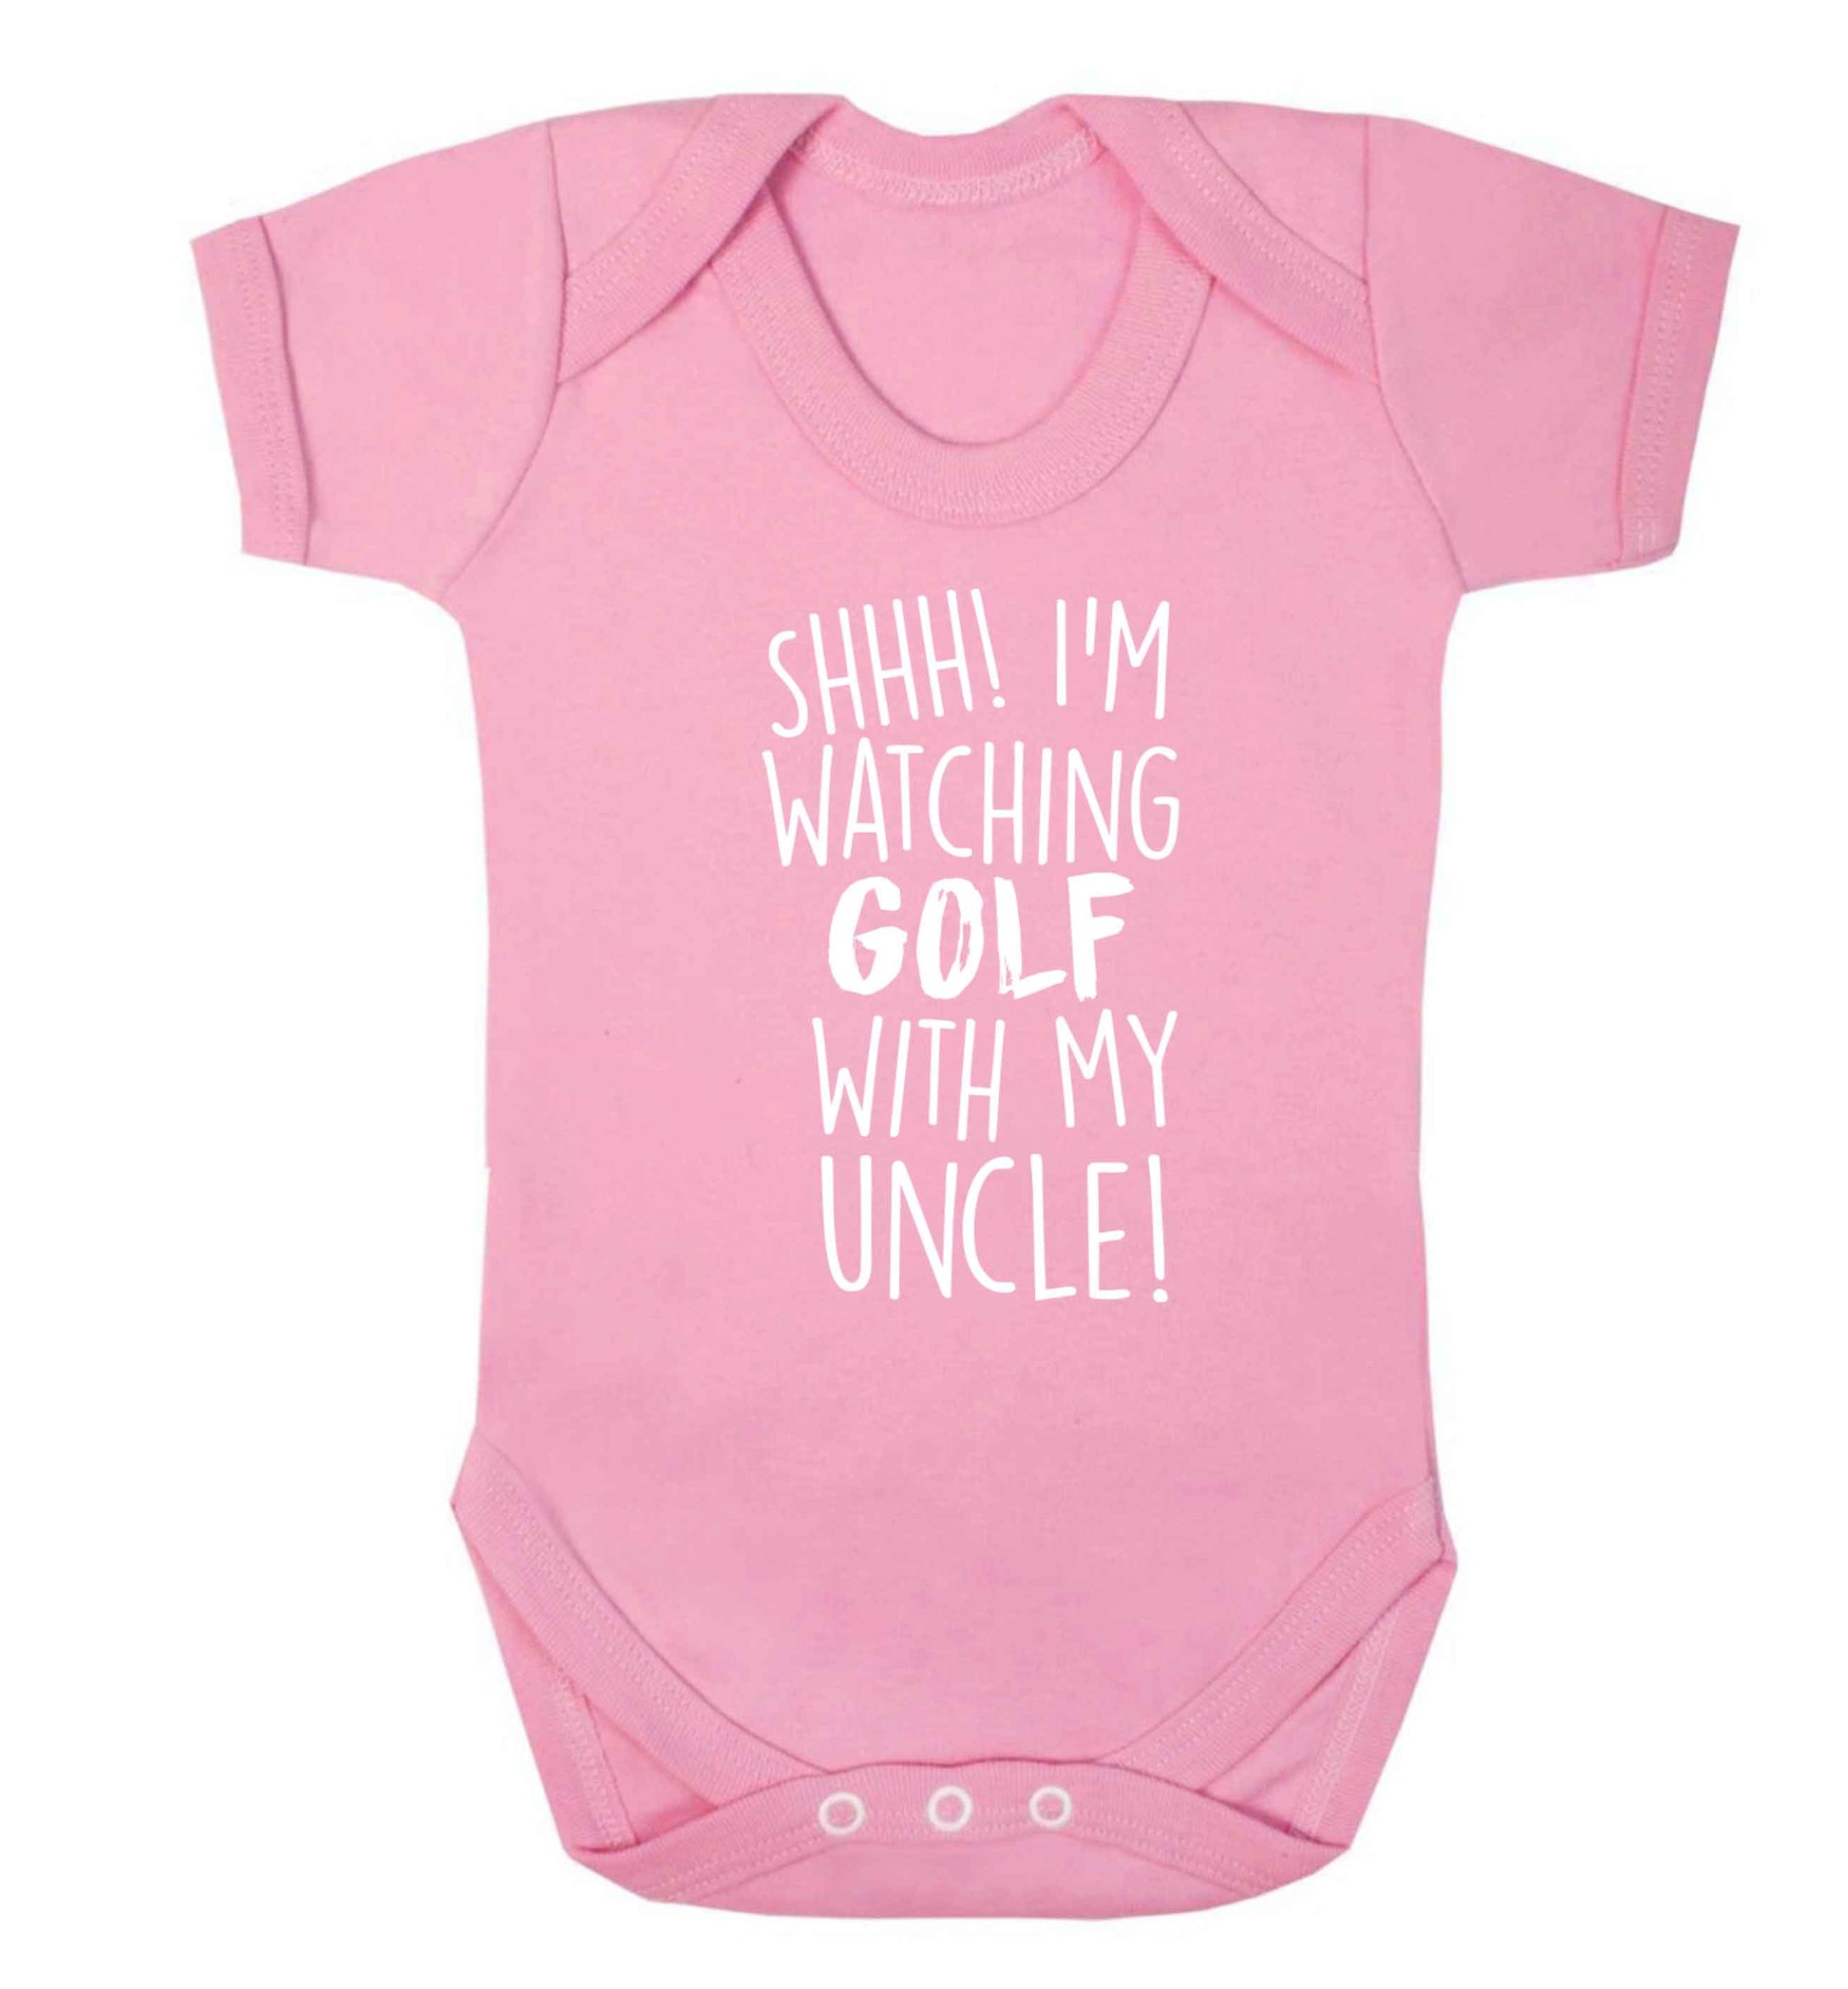 Shh I'm watching golf with my uncle Baby Vest pale pink 18-24 months